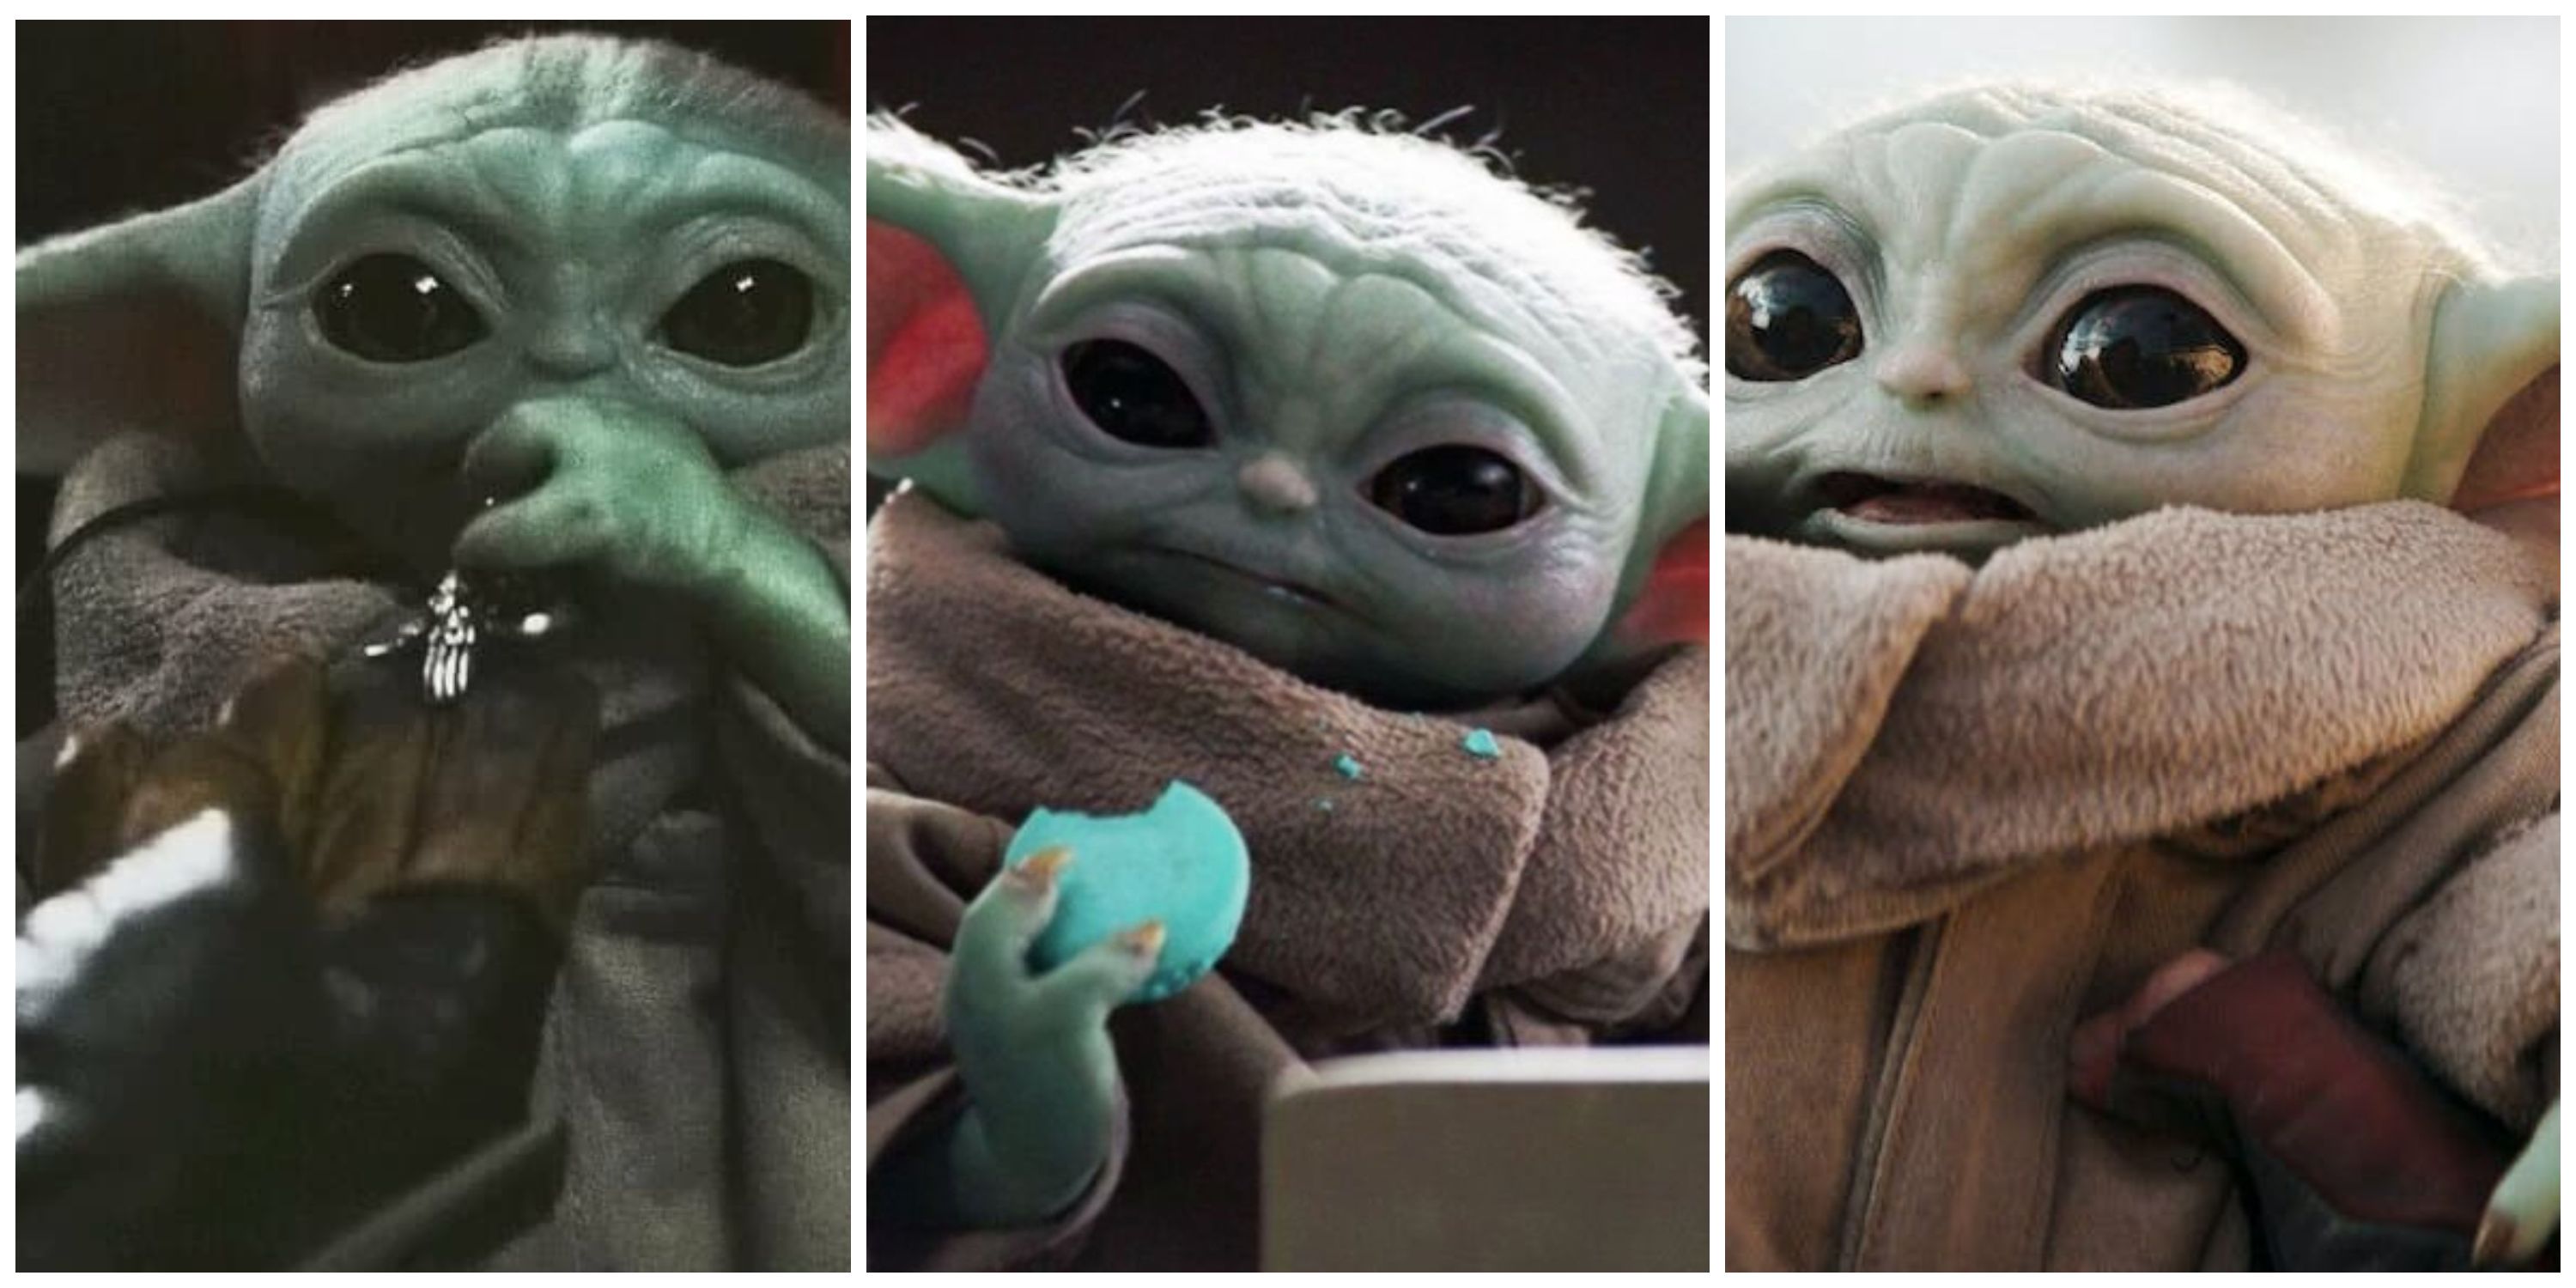 What Is Baby Yoda?